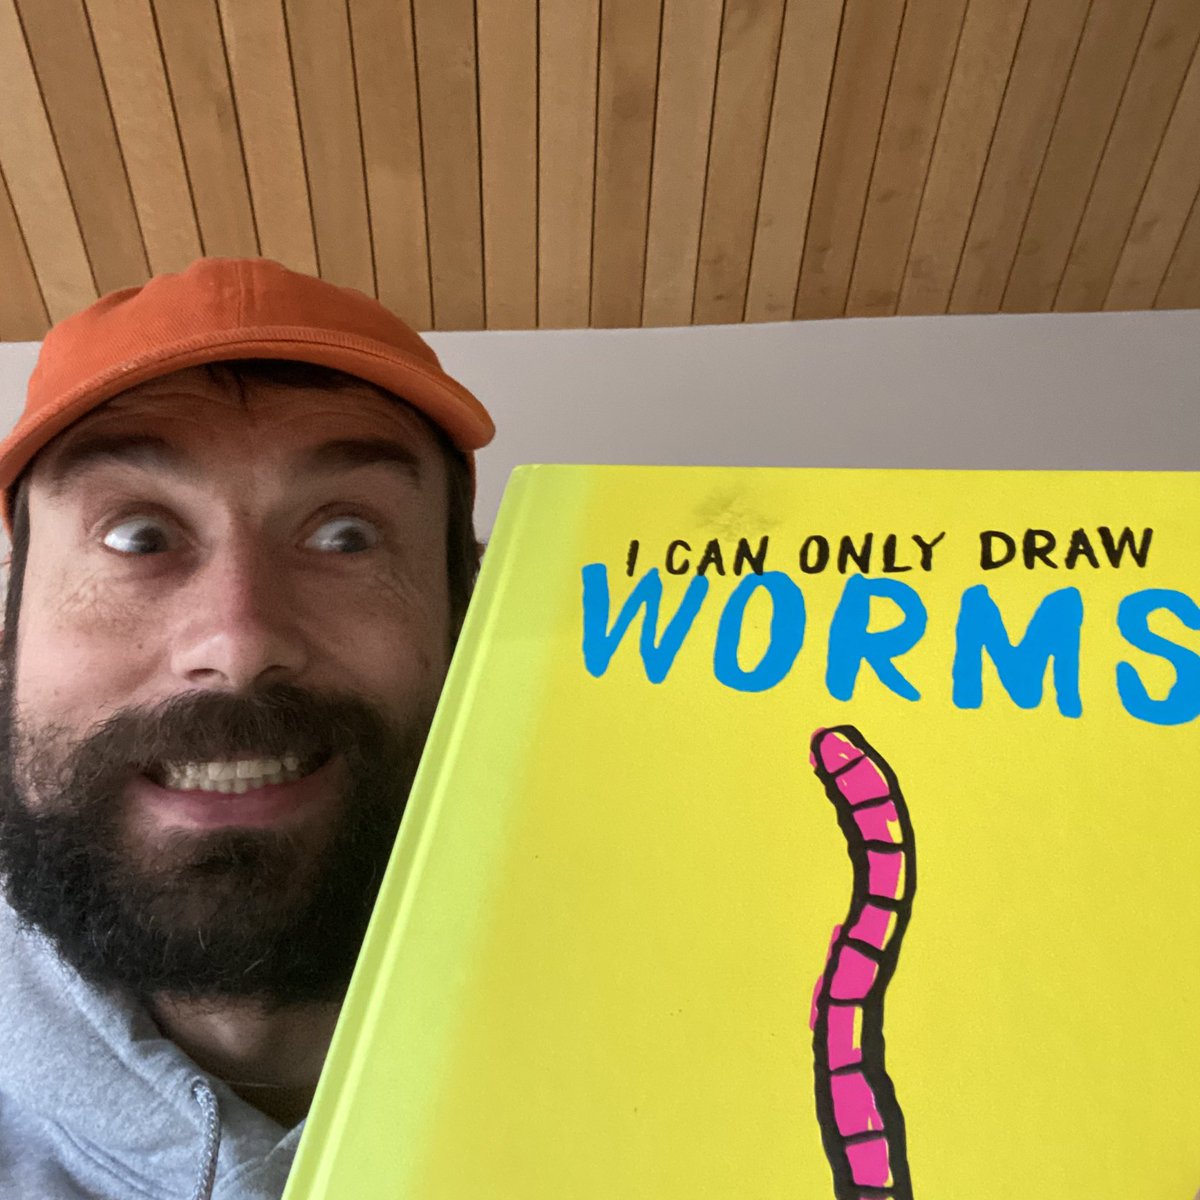 God bless a world where you get paid more than once for a rubbish picture of a worm that took 6 seconds. #PLR 
#publicApology @PuffinBooks #iLoveLibraries #saveLibraries